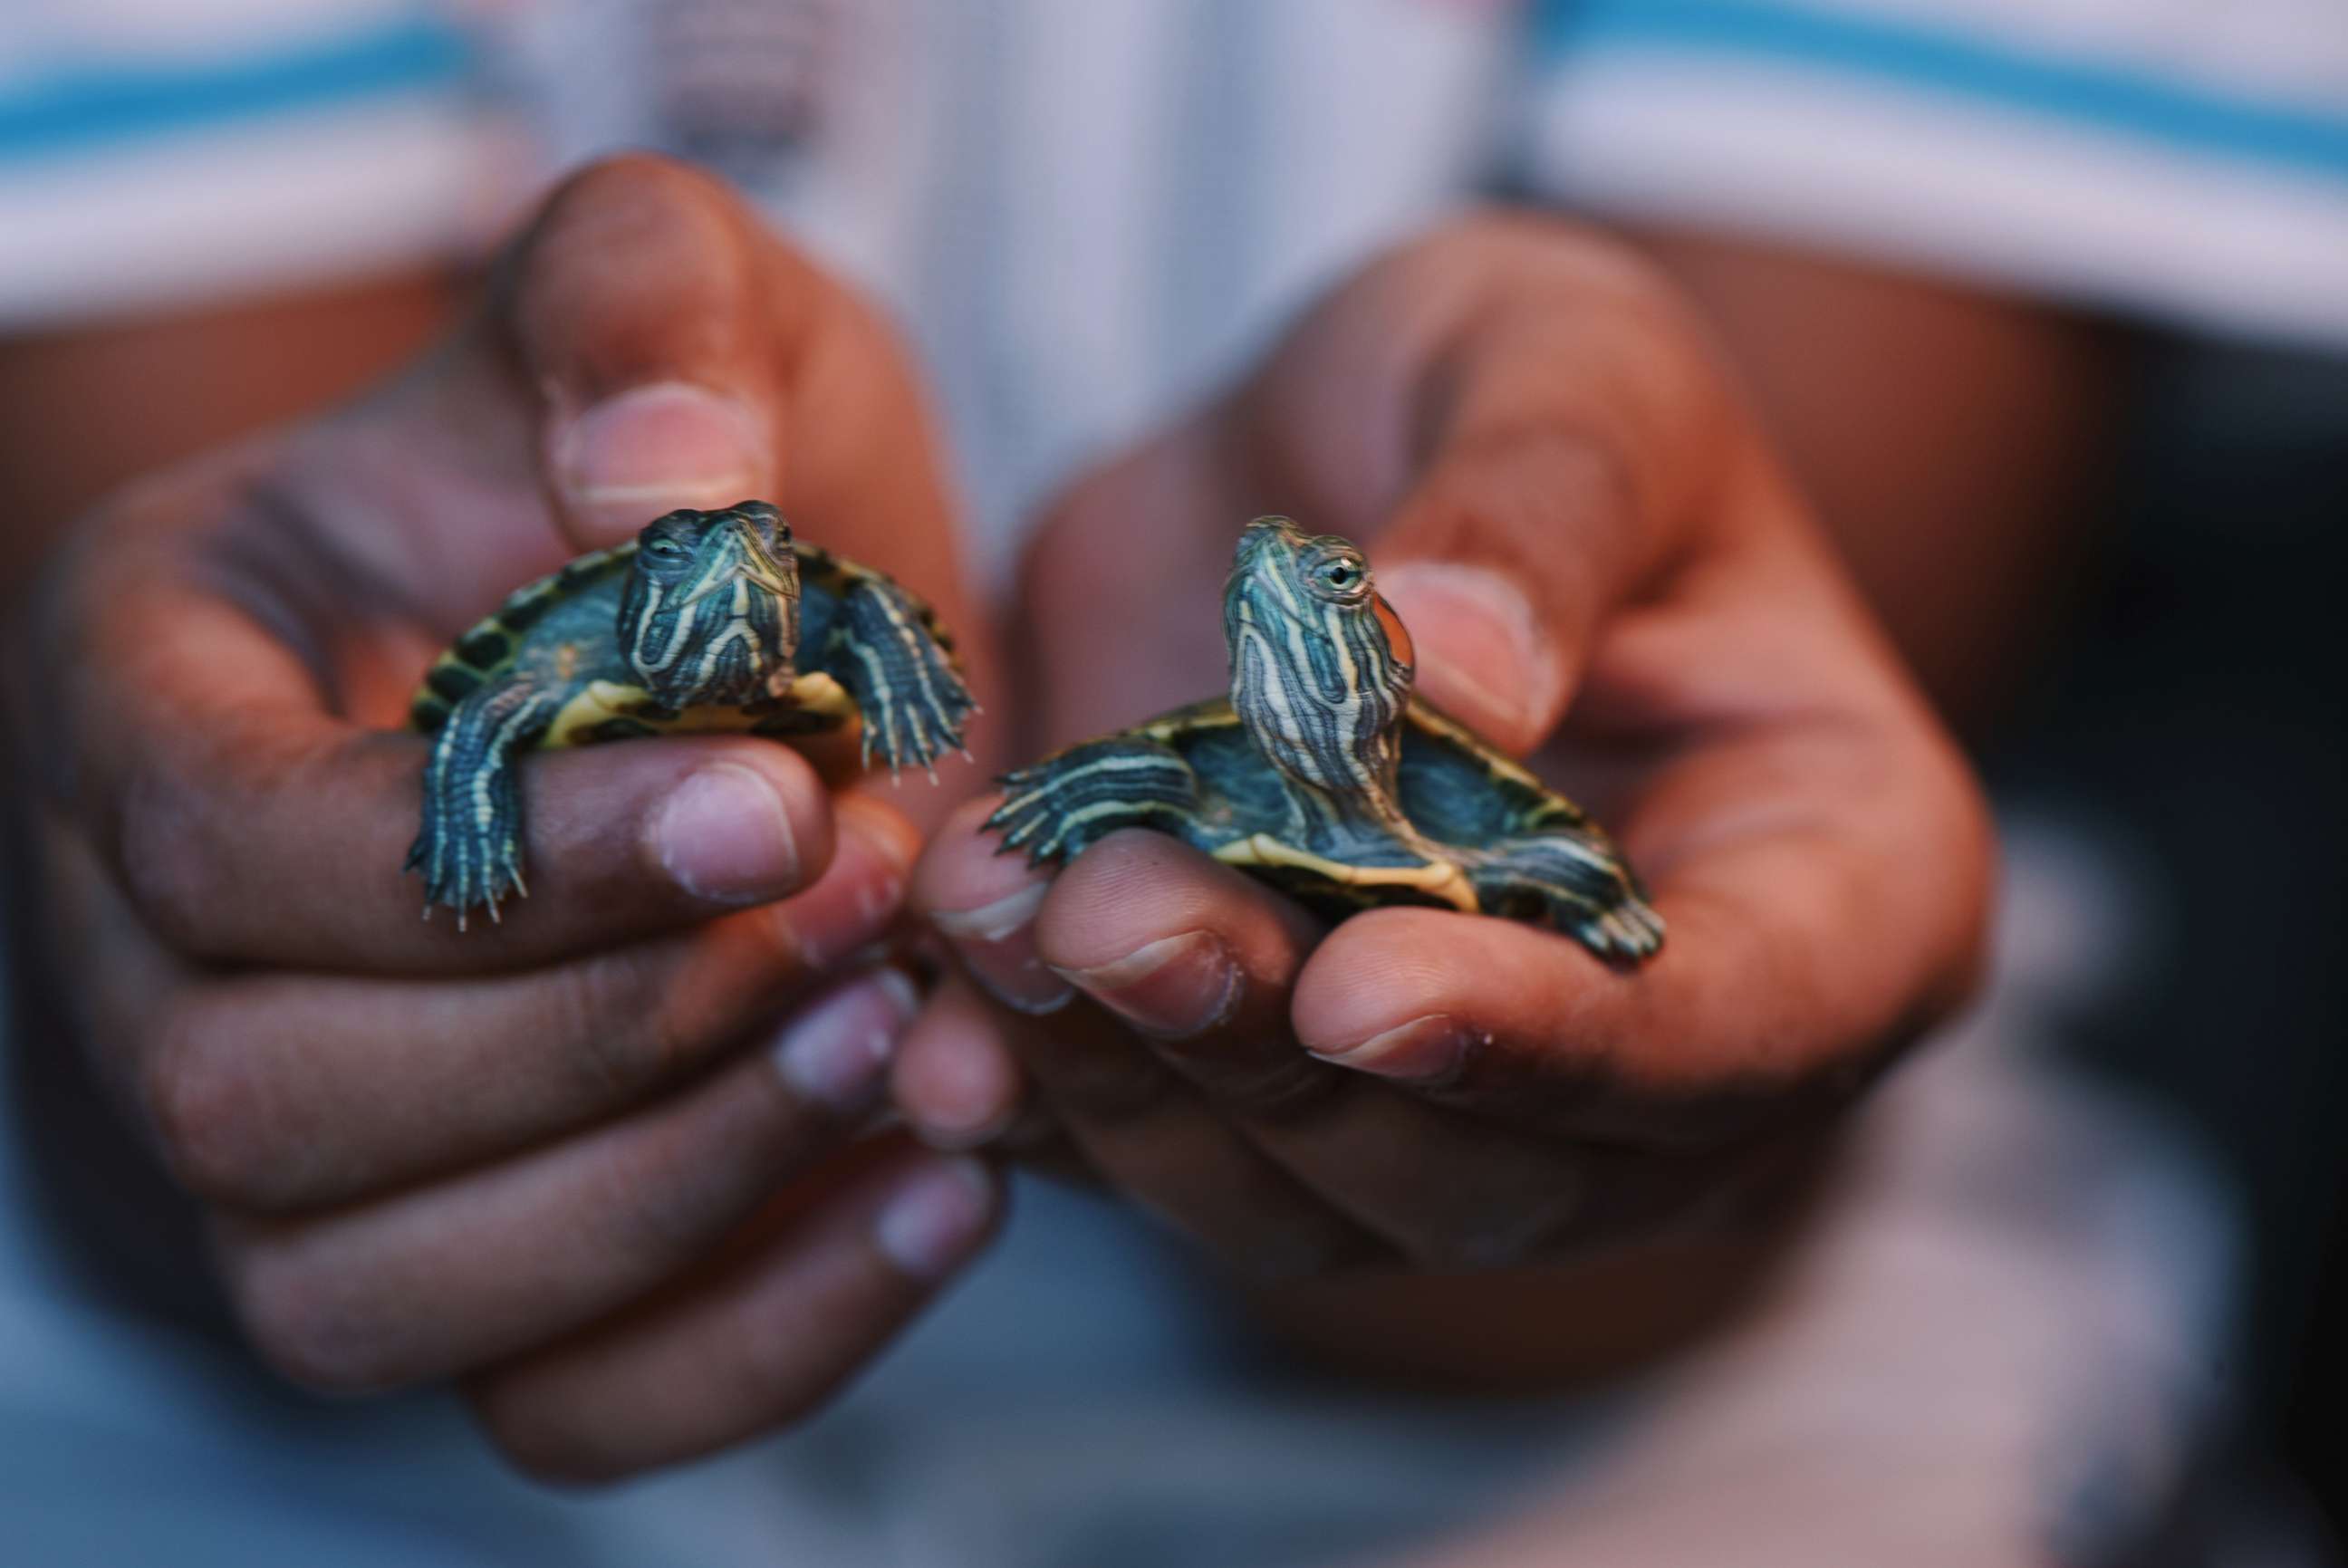 PHOTO: A Child holds two Red eared slider turtles.